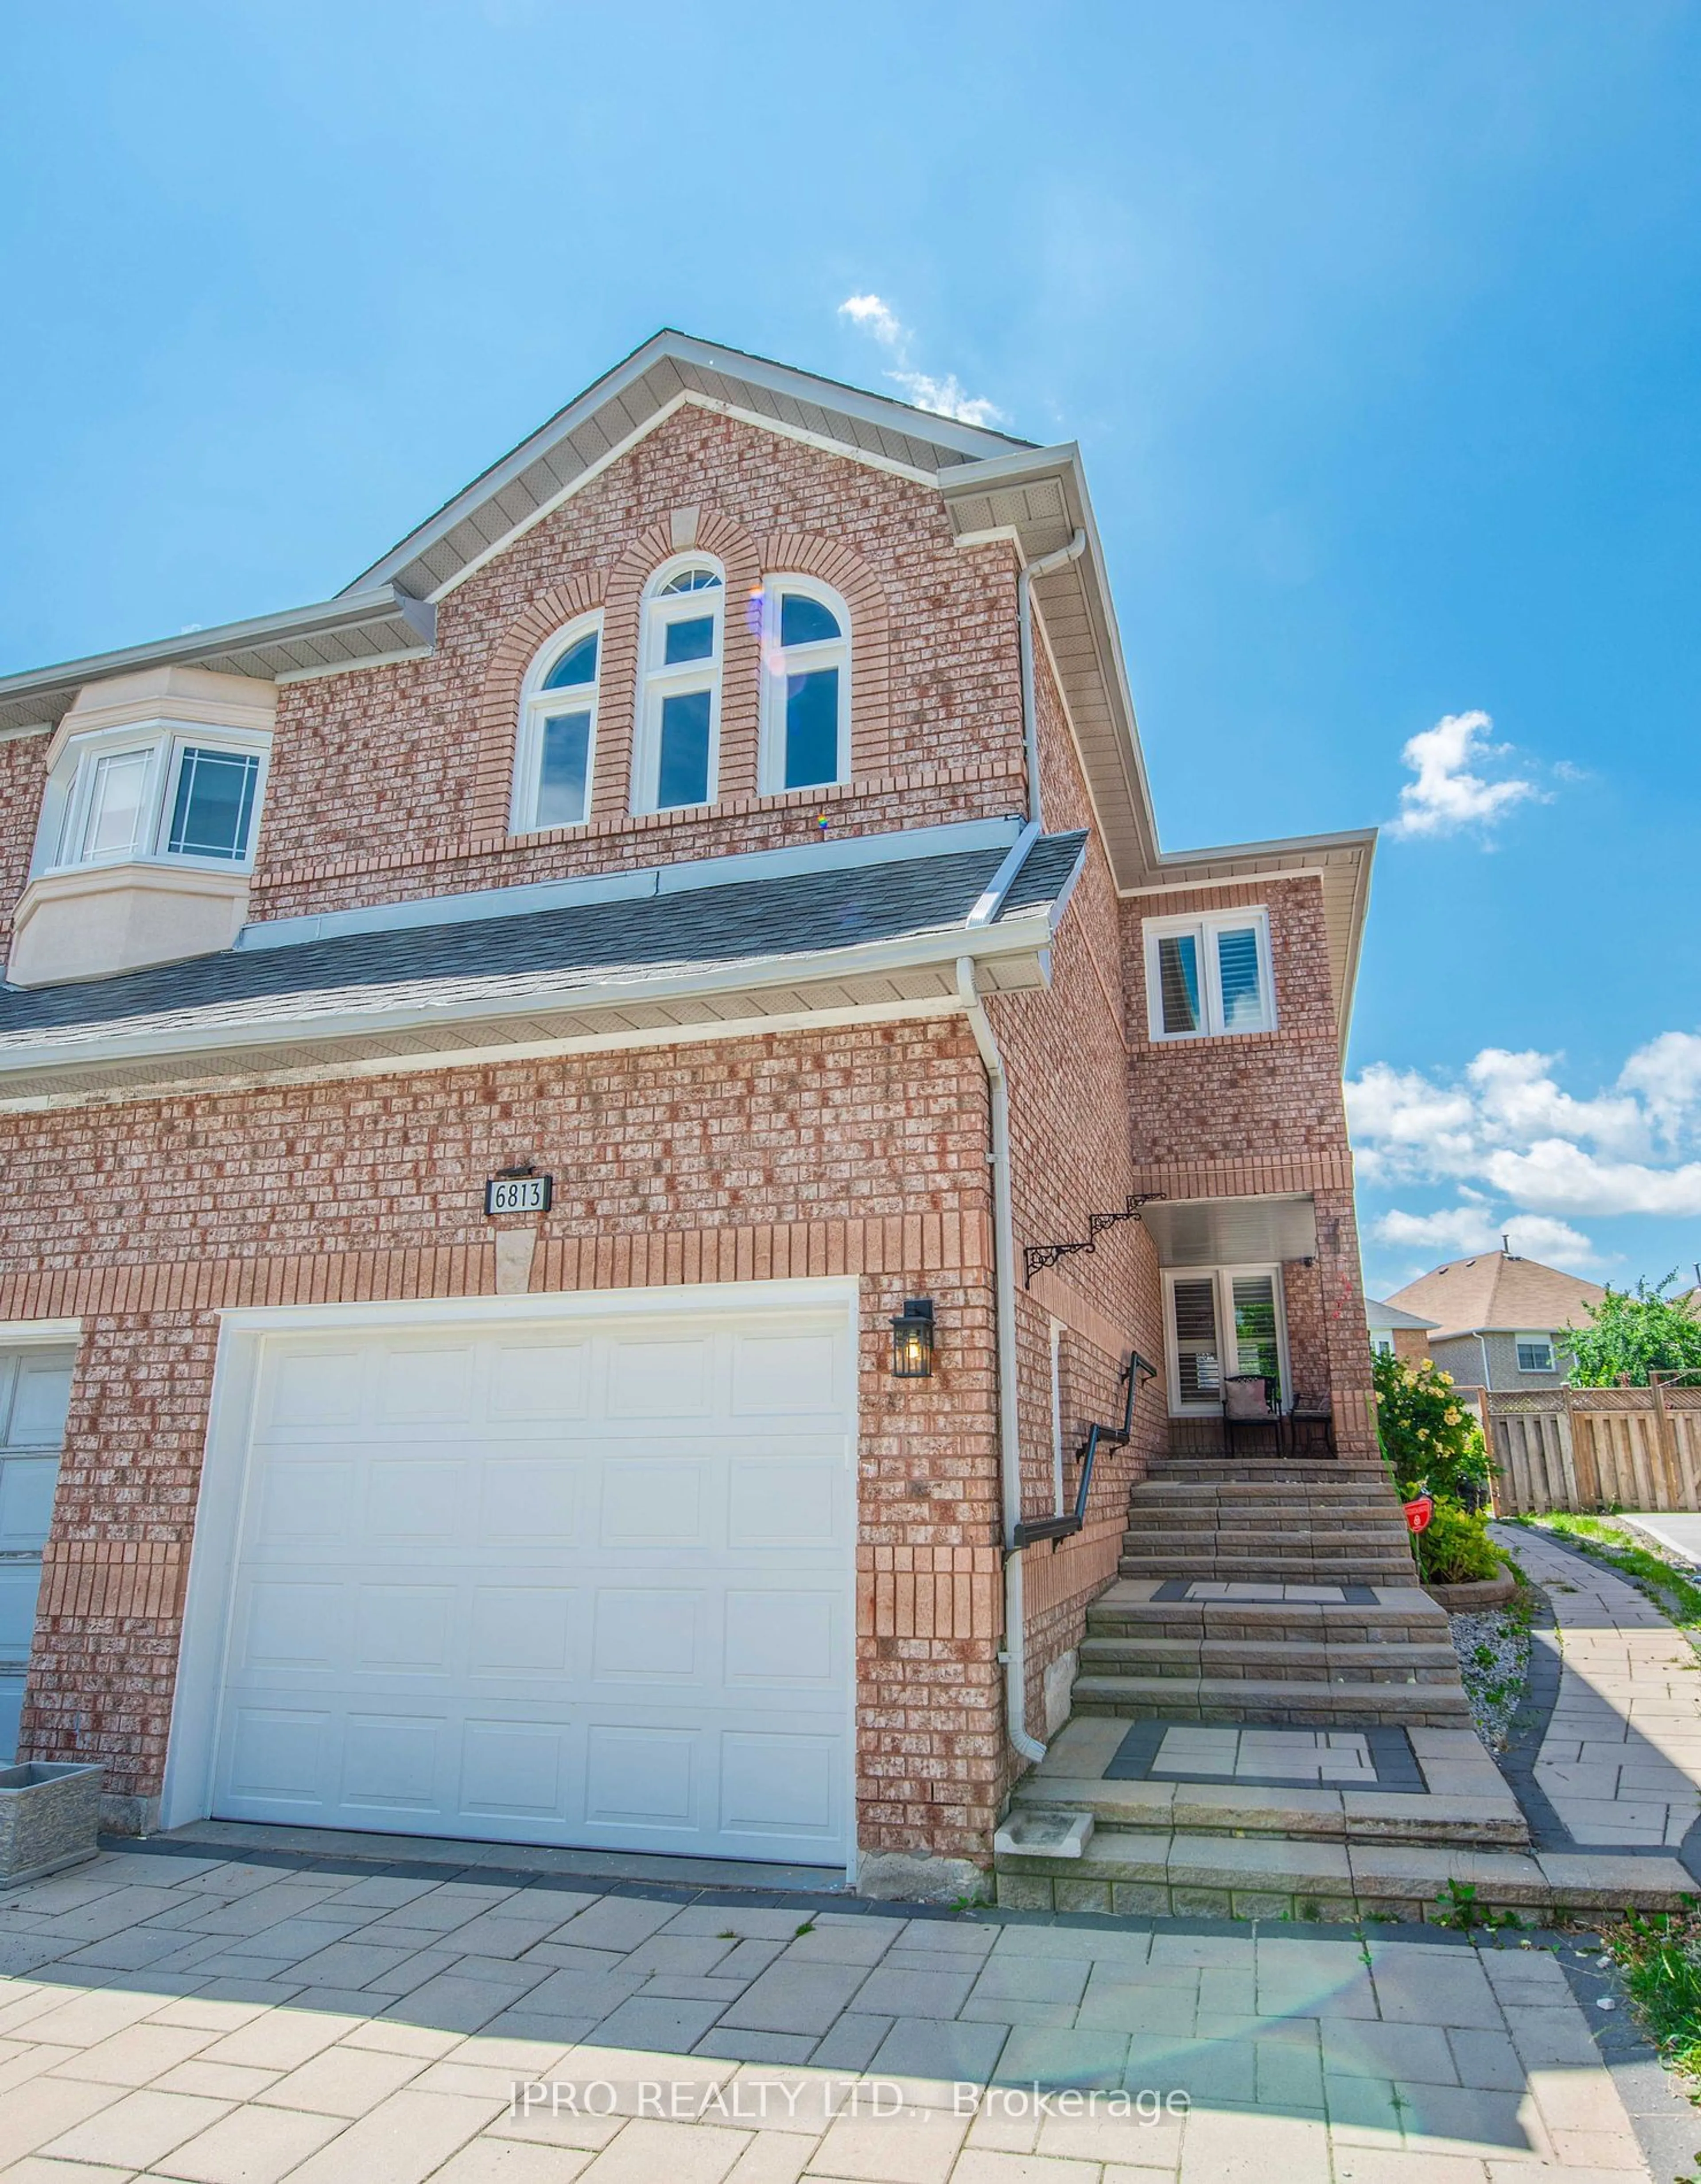 Home with brick exterior material for 6813 Bansbridge Cres, Mississauga Ontario L5N 6T2